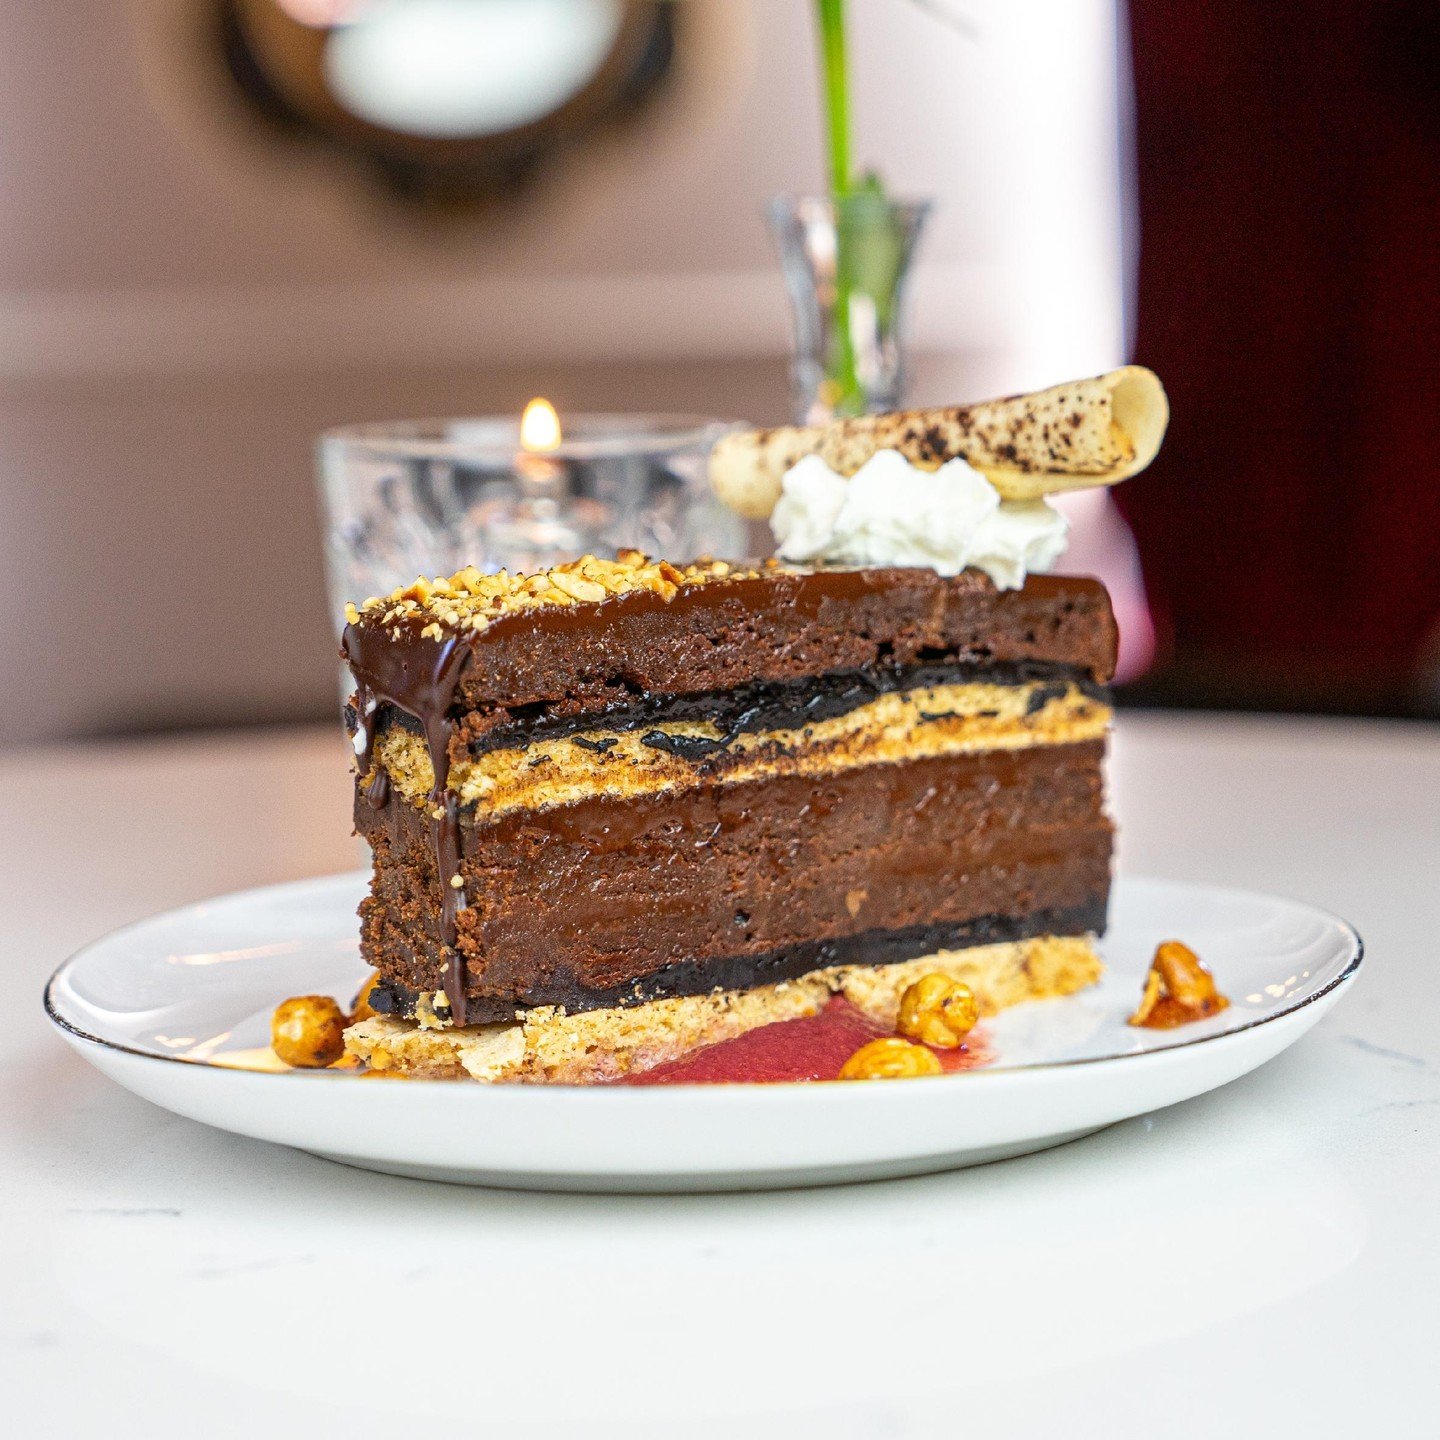 Let's take a moment for our Hazelnut Torte 🌰

Comment below what your go-to dessert from Baileys' Chocolate Bar is⁉️

Open from 5pm-10pm tonight!
#chocolatebar #lafayettesquare #stl